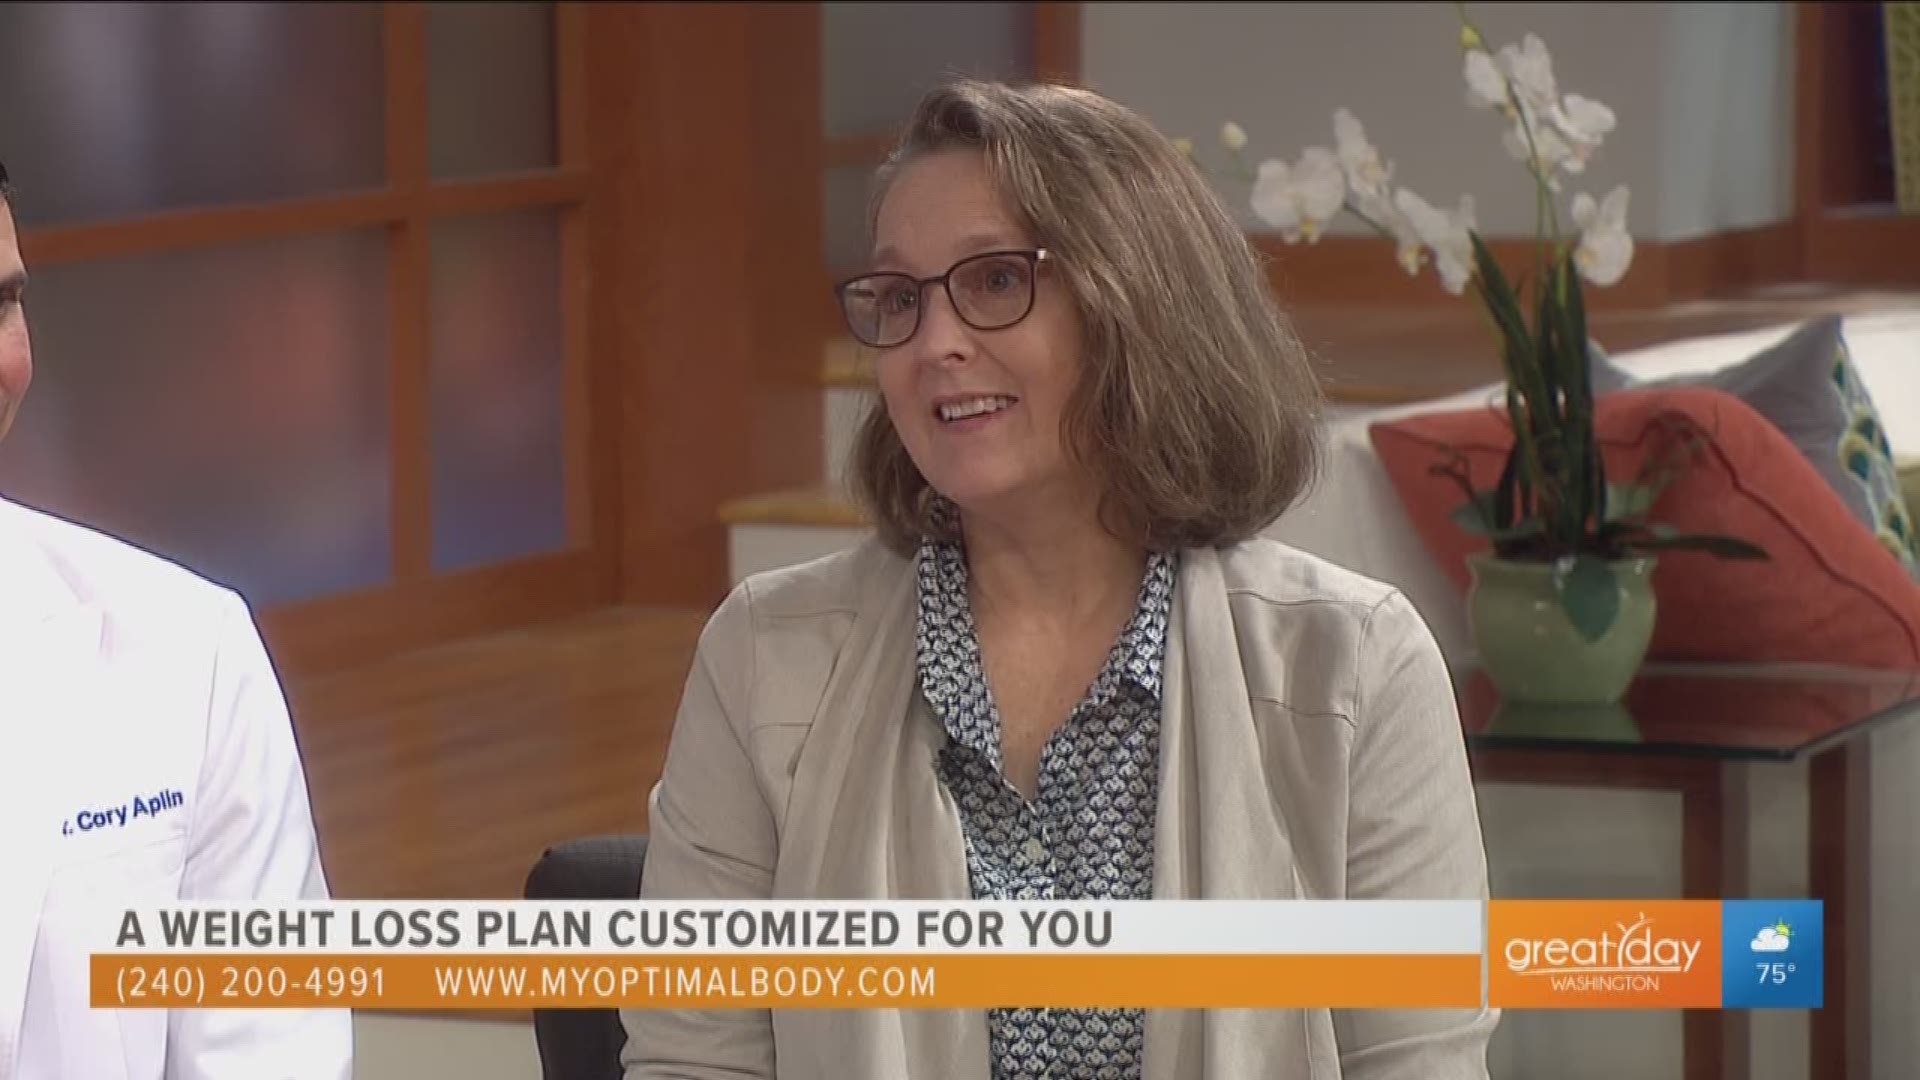 Dr. Aplin is joined with Catherine Wilson who shares how a customized weight loss plan helped her get back to normal physical activities. Sponsored by Optimal Body.